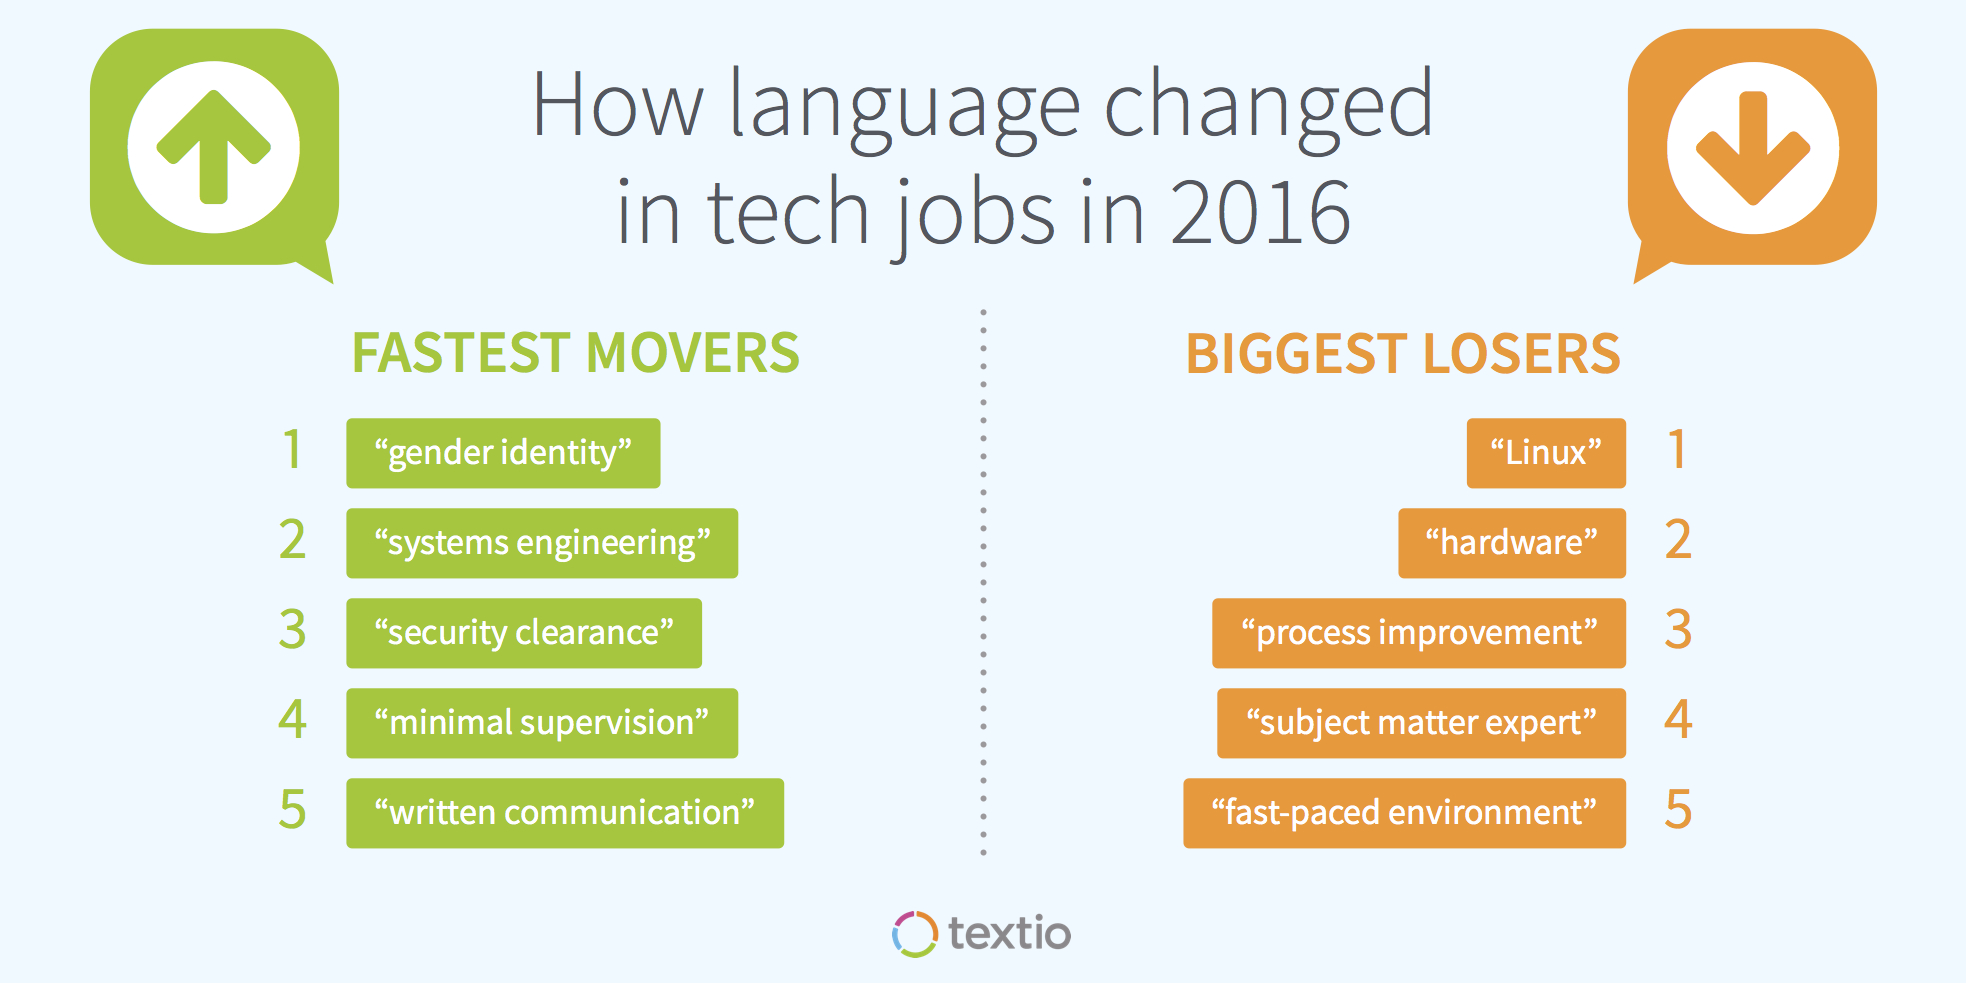 How language changed in tech jobs in 2016, fastest movers: gender identity, systems engineering, security clearance, minimal supervision, written communication; biggest losers: linux, hardware, process improvement, subject matter expert, fast-paced environment